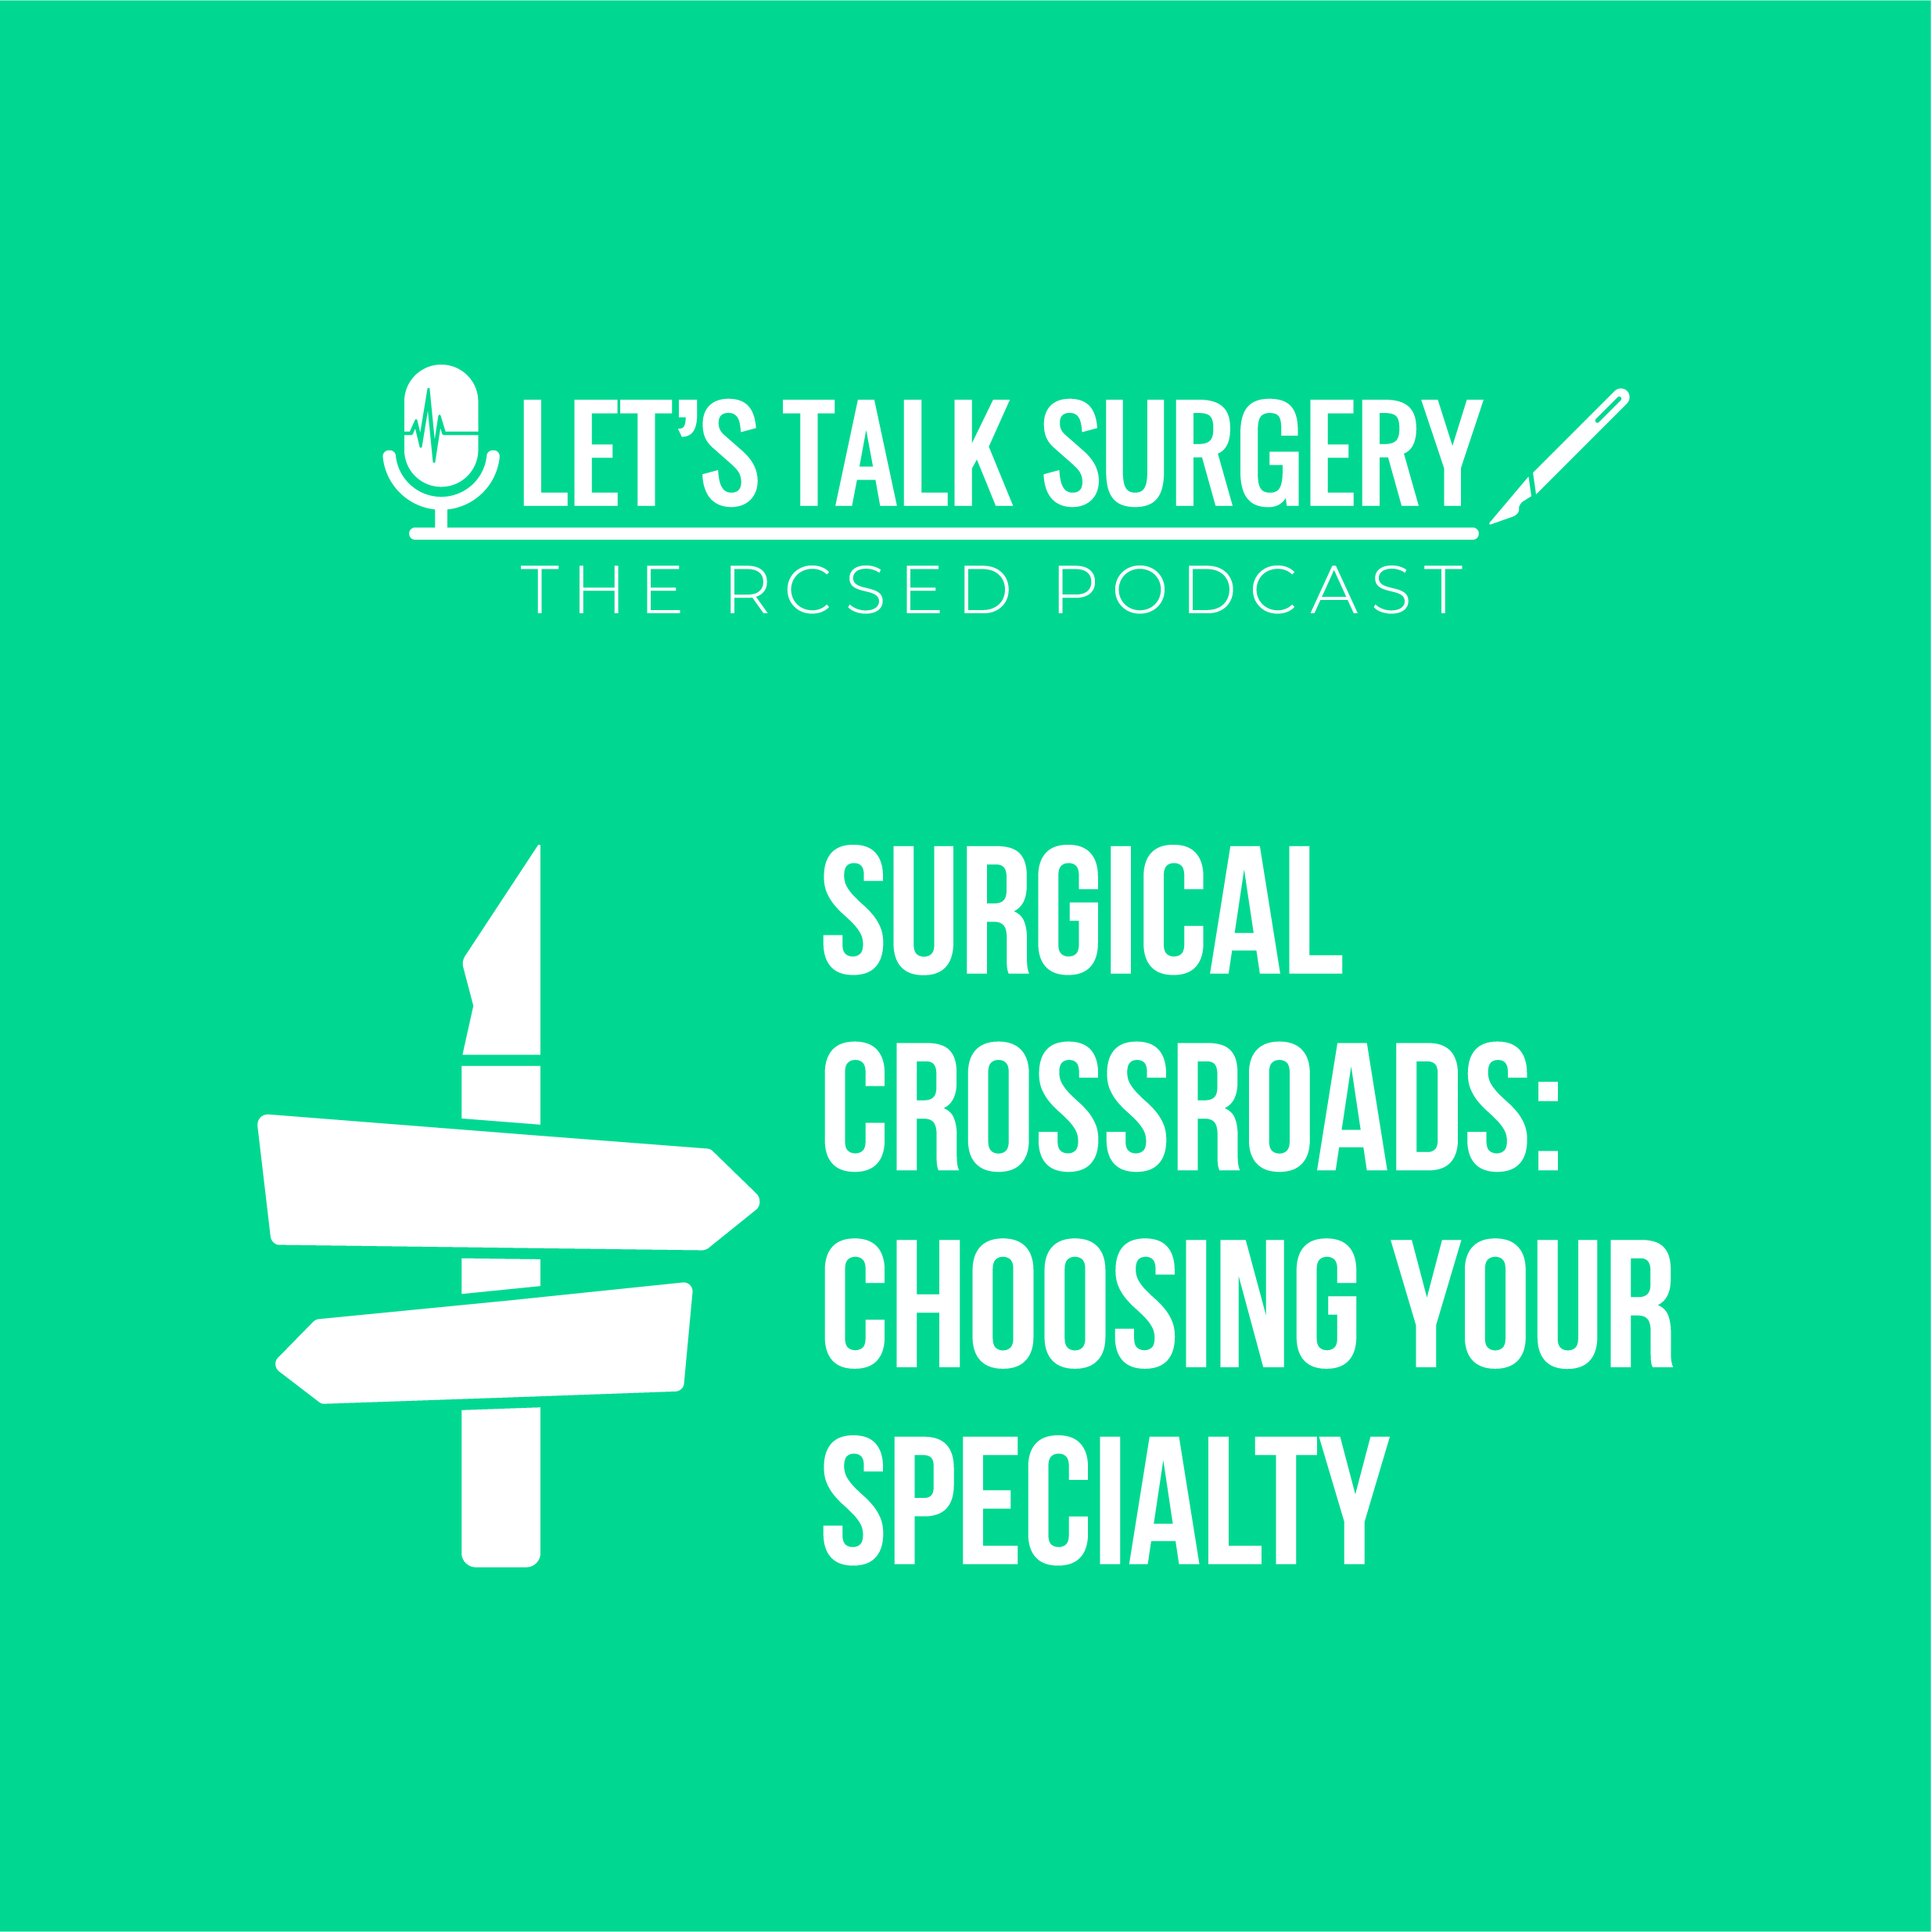 Let's Talk Surgery Podcast, Surgical Crossroads: "Choosing your specialty - The Cardiothoracic Episode"